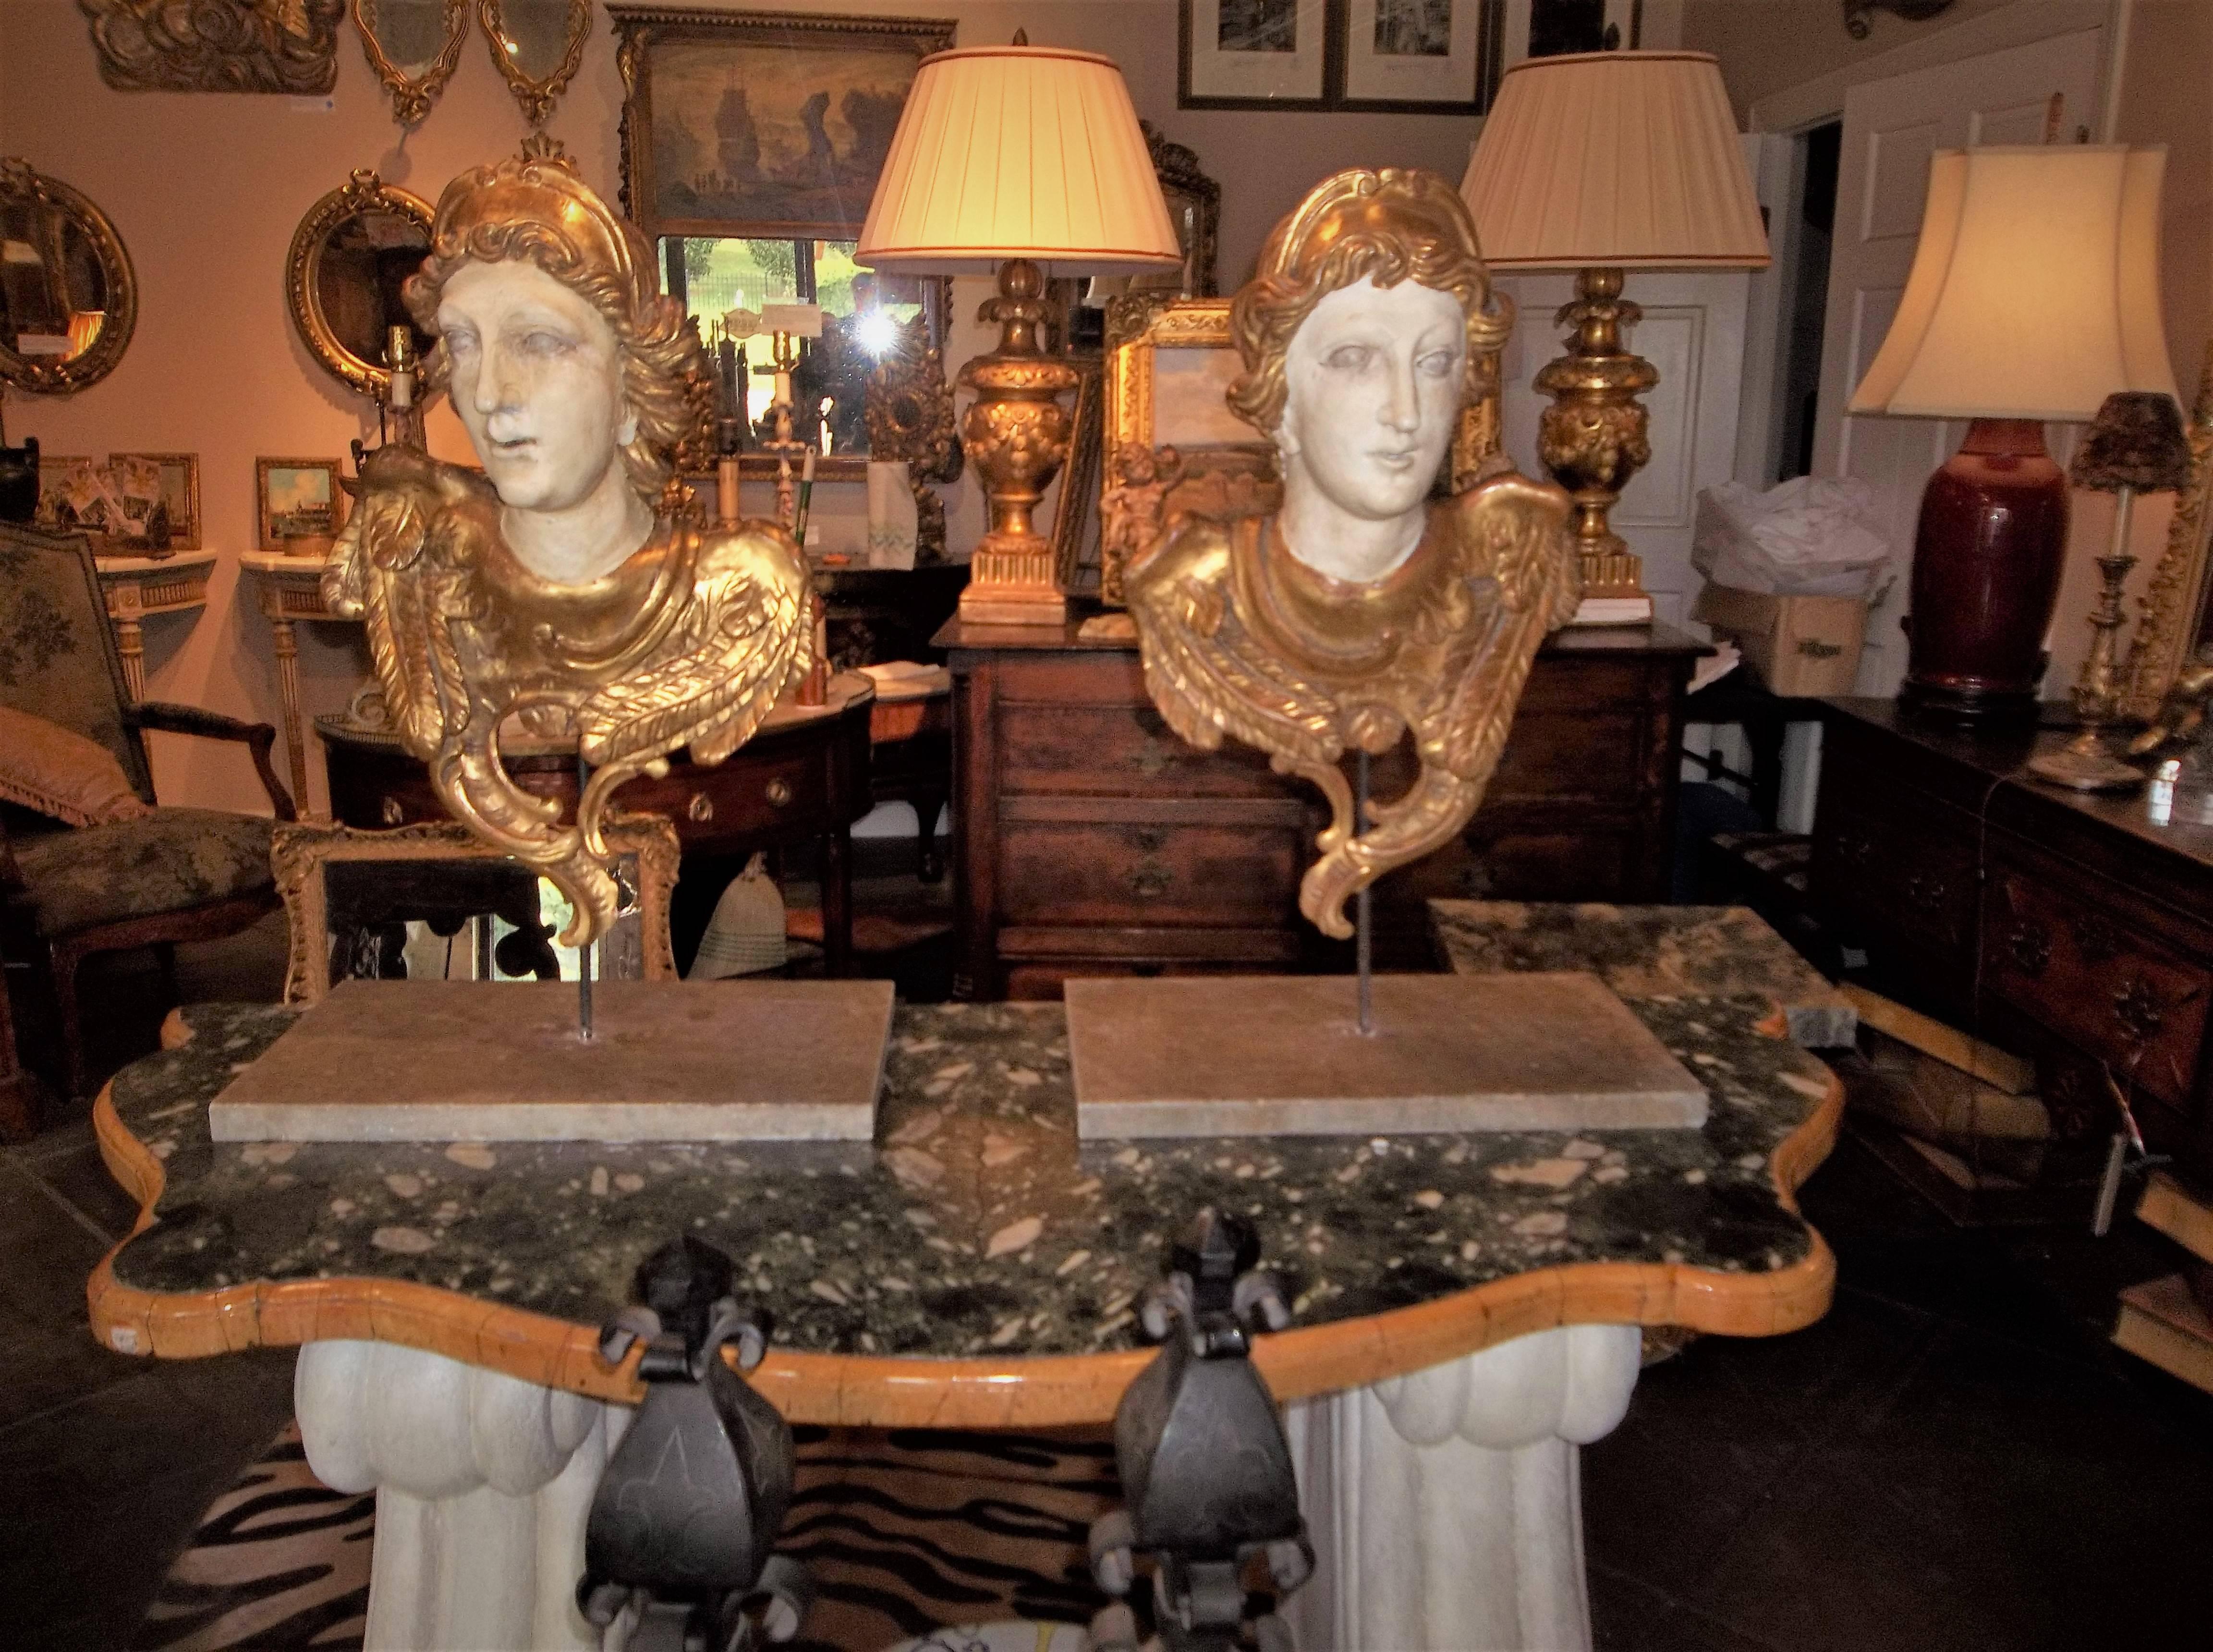 Possibly angels from an altar (note the feathers) or the usual cherubs or putti.
Probably early 19th century, Italy or France. 

Crisply carved with gilt highlights. On iron rods and heavy marble bases. Cannot tip over, very sturdy. Can be wall hung